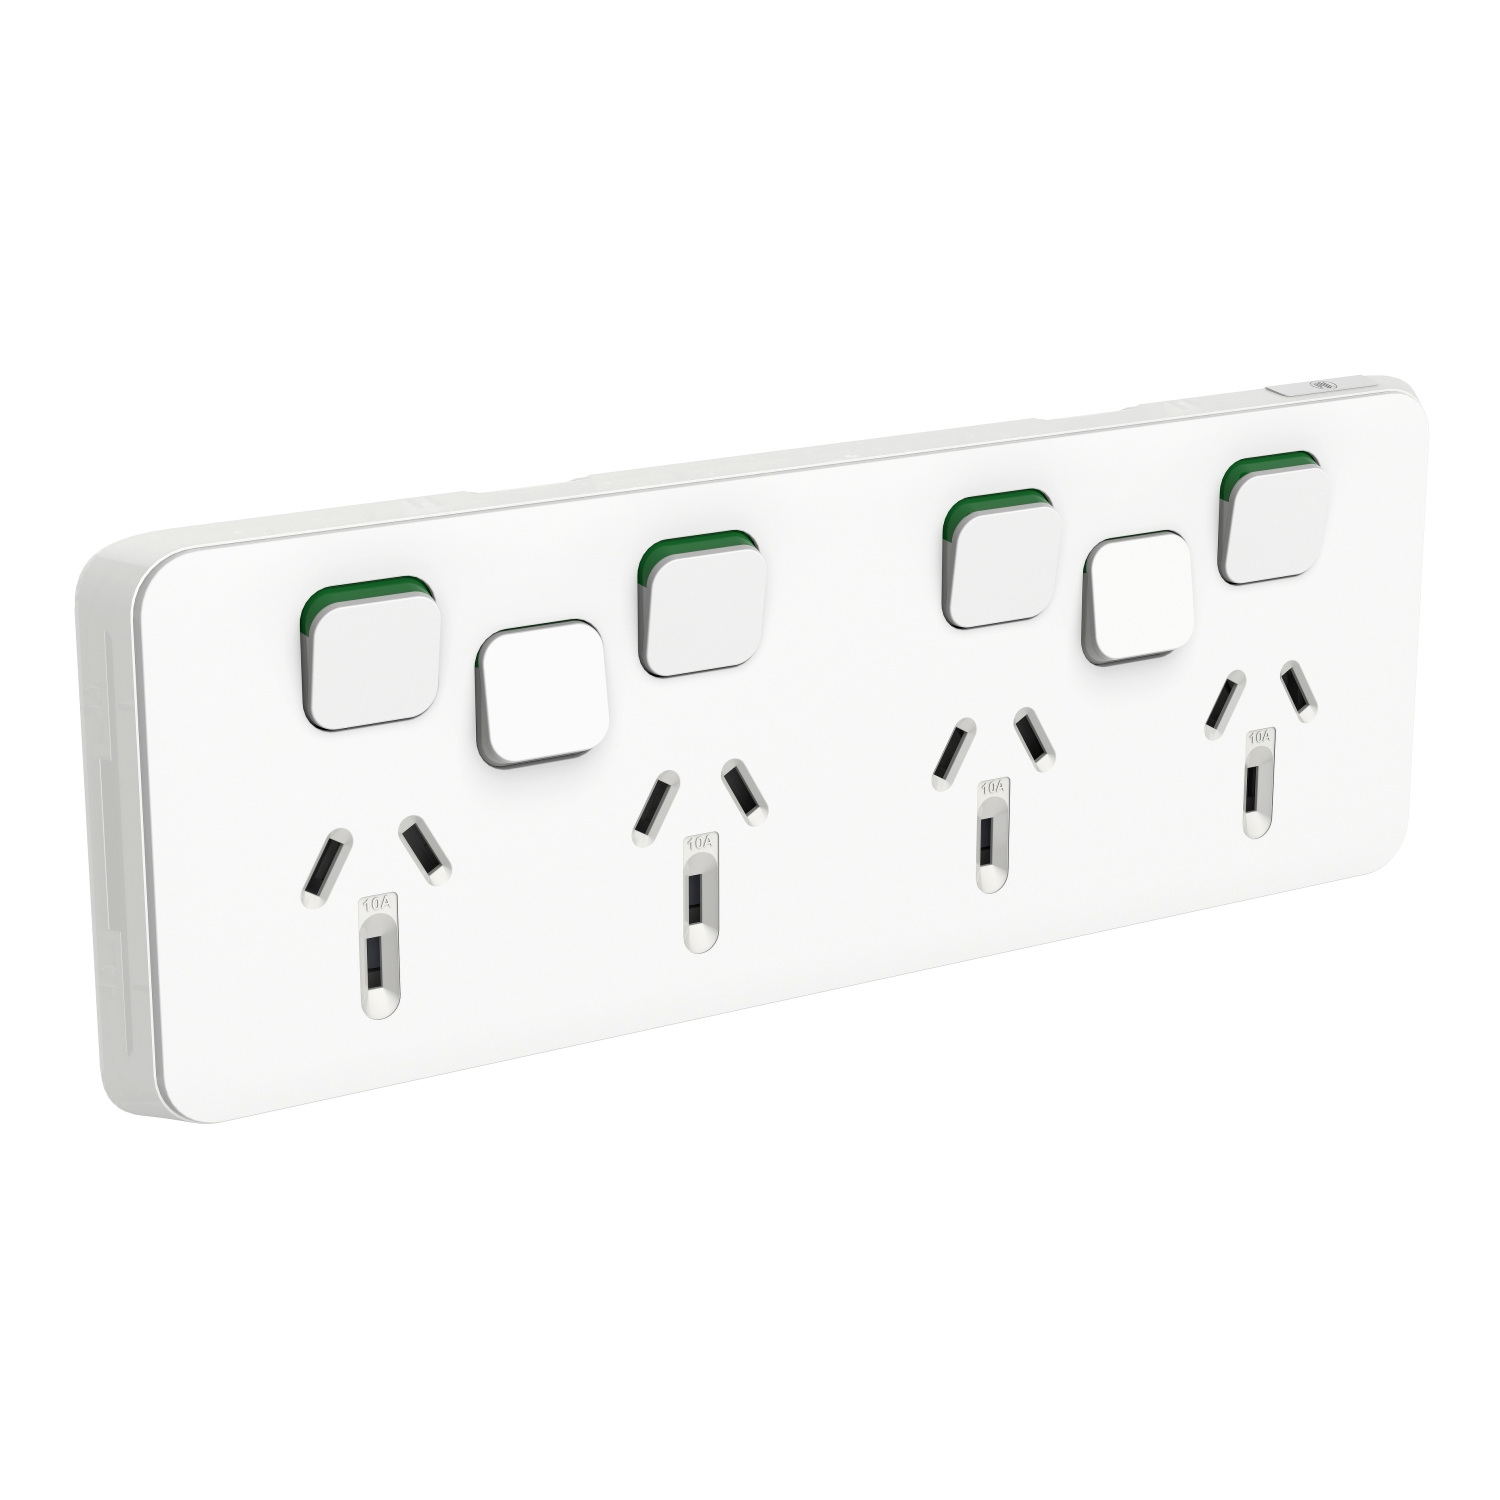 PDL Iconic - Cover Plates Quad Switched Socket 10A + 2 Switches - Vivid White